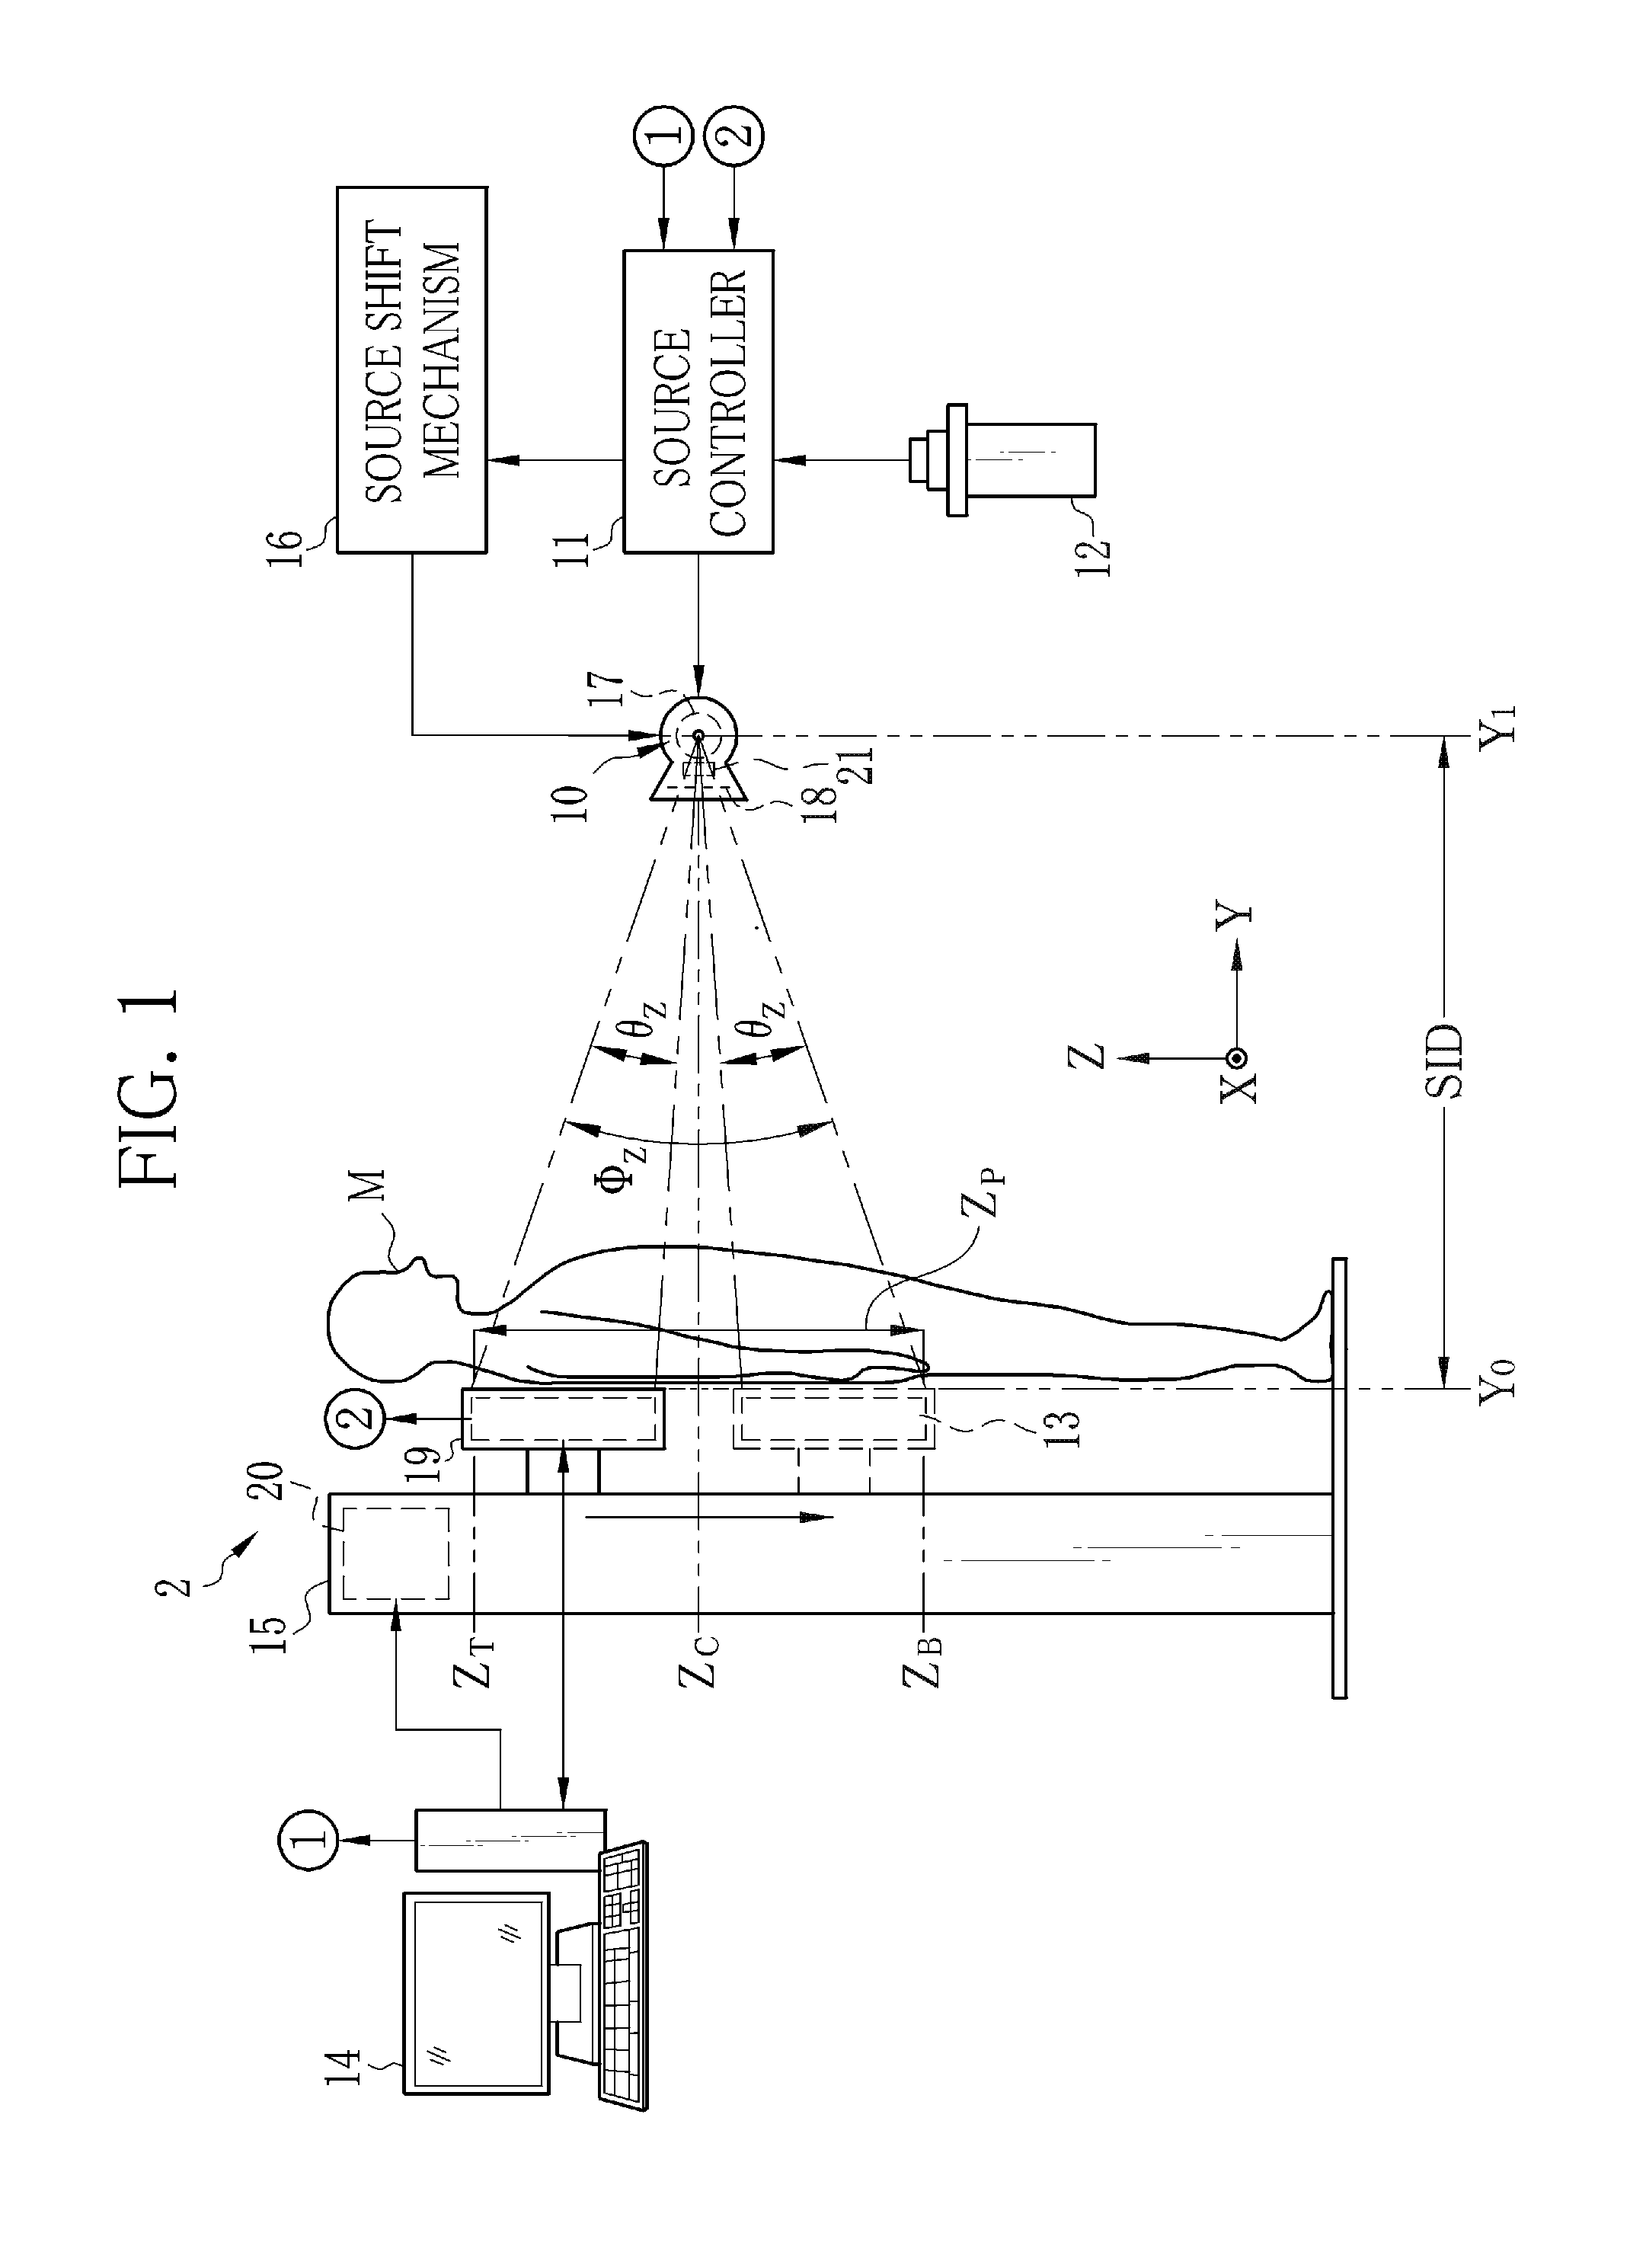 Radiation imaging system, method for taking continuous radiographic image, and radiation image detecting device